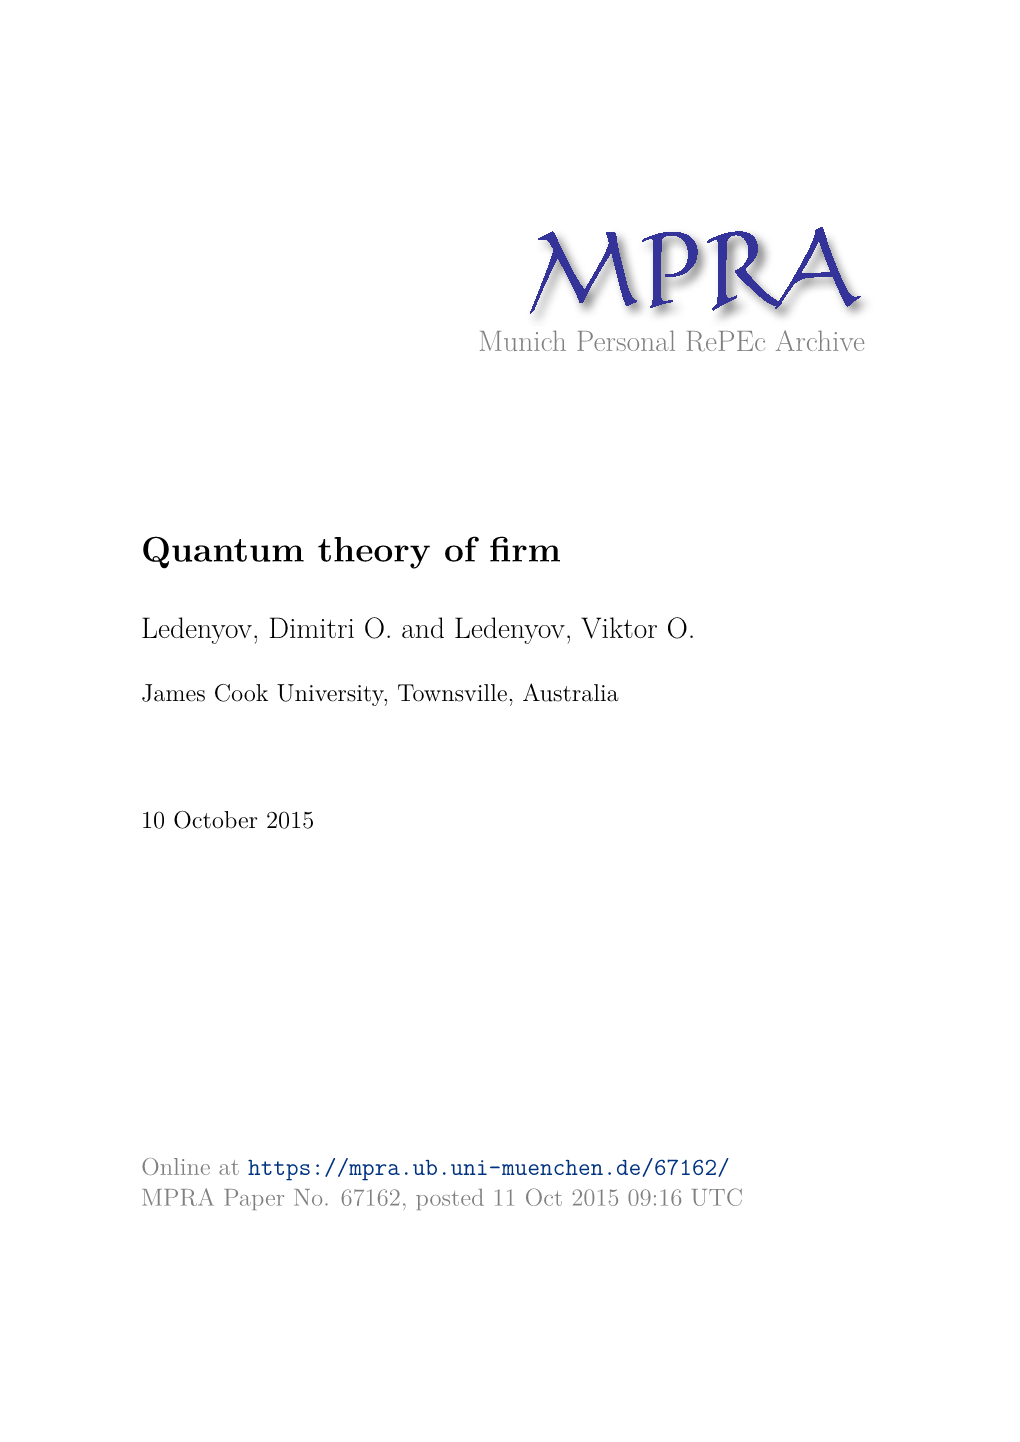 Quantum Theory of Firm